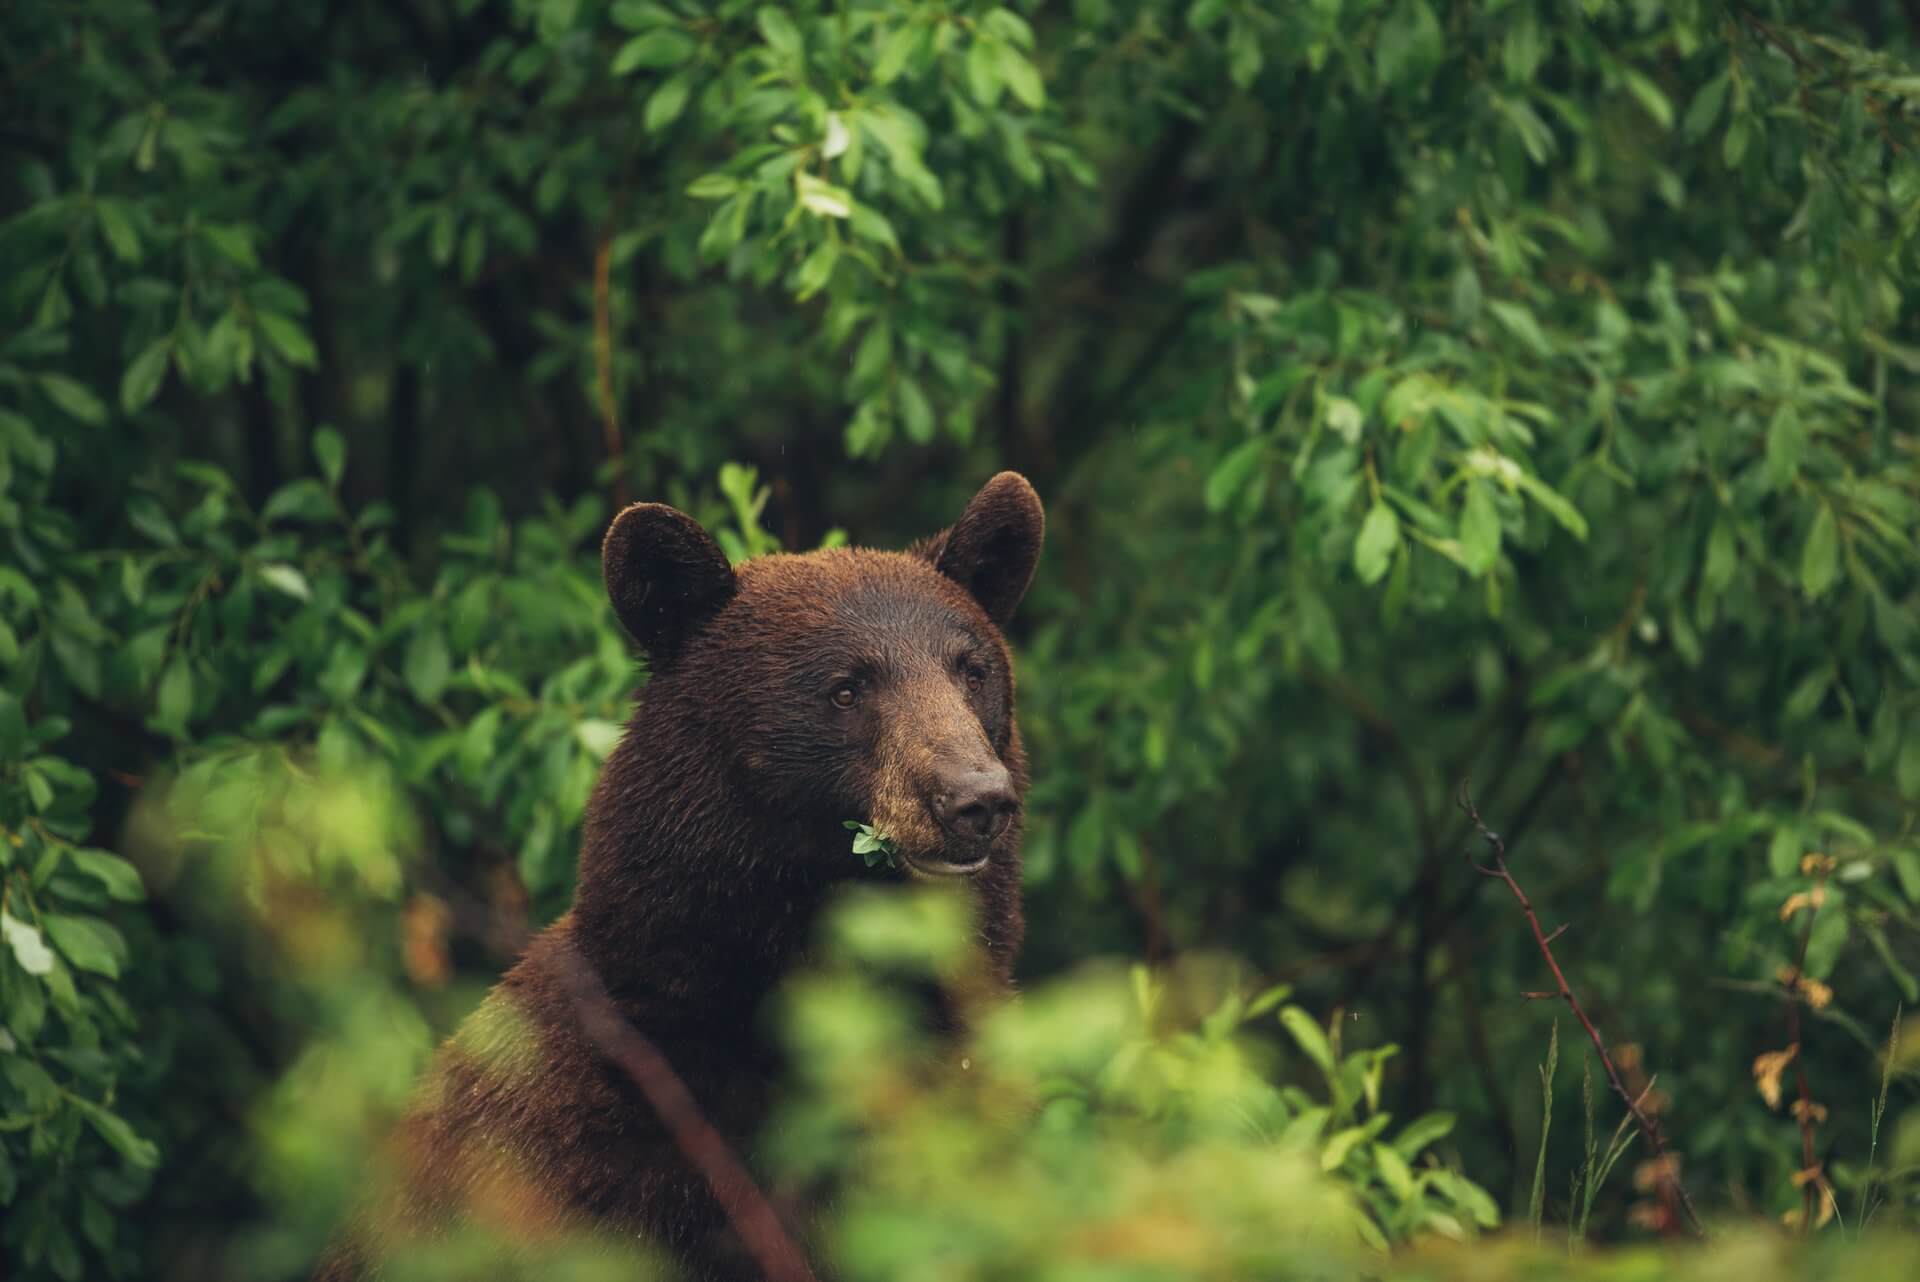 Up Close & Personal With Canada’s Bears